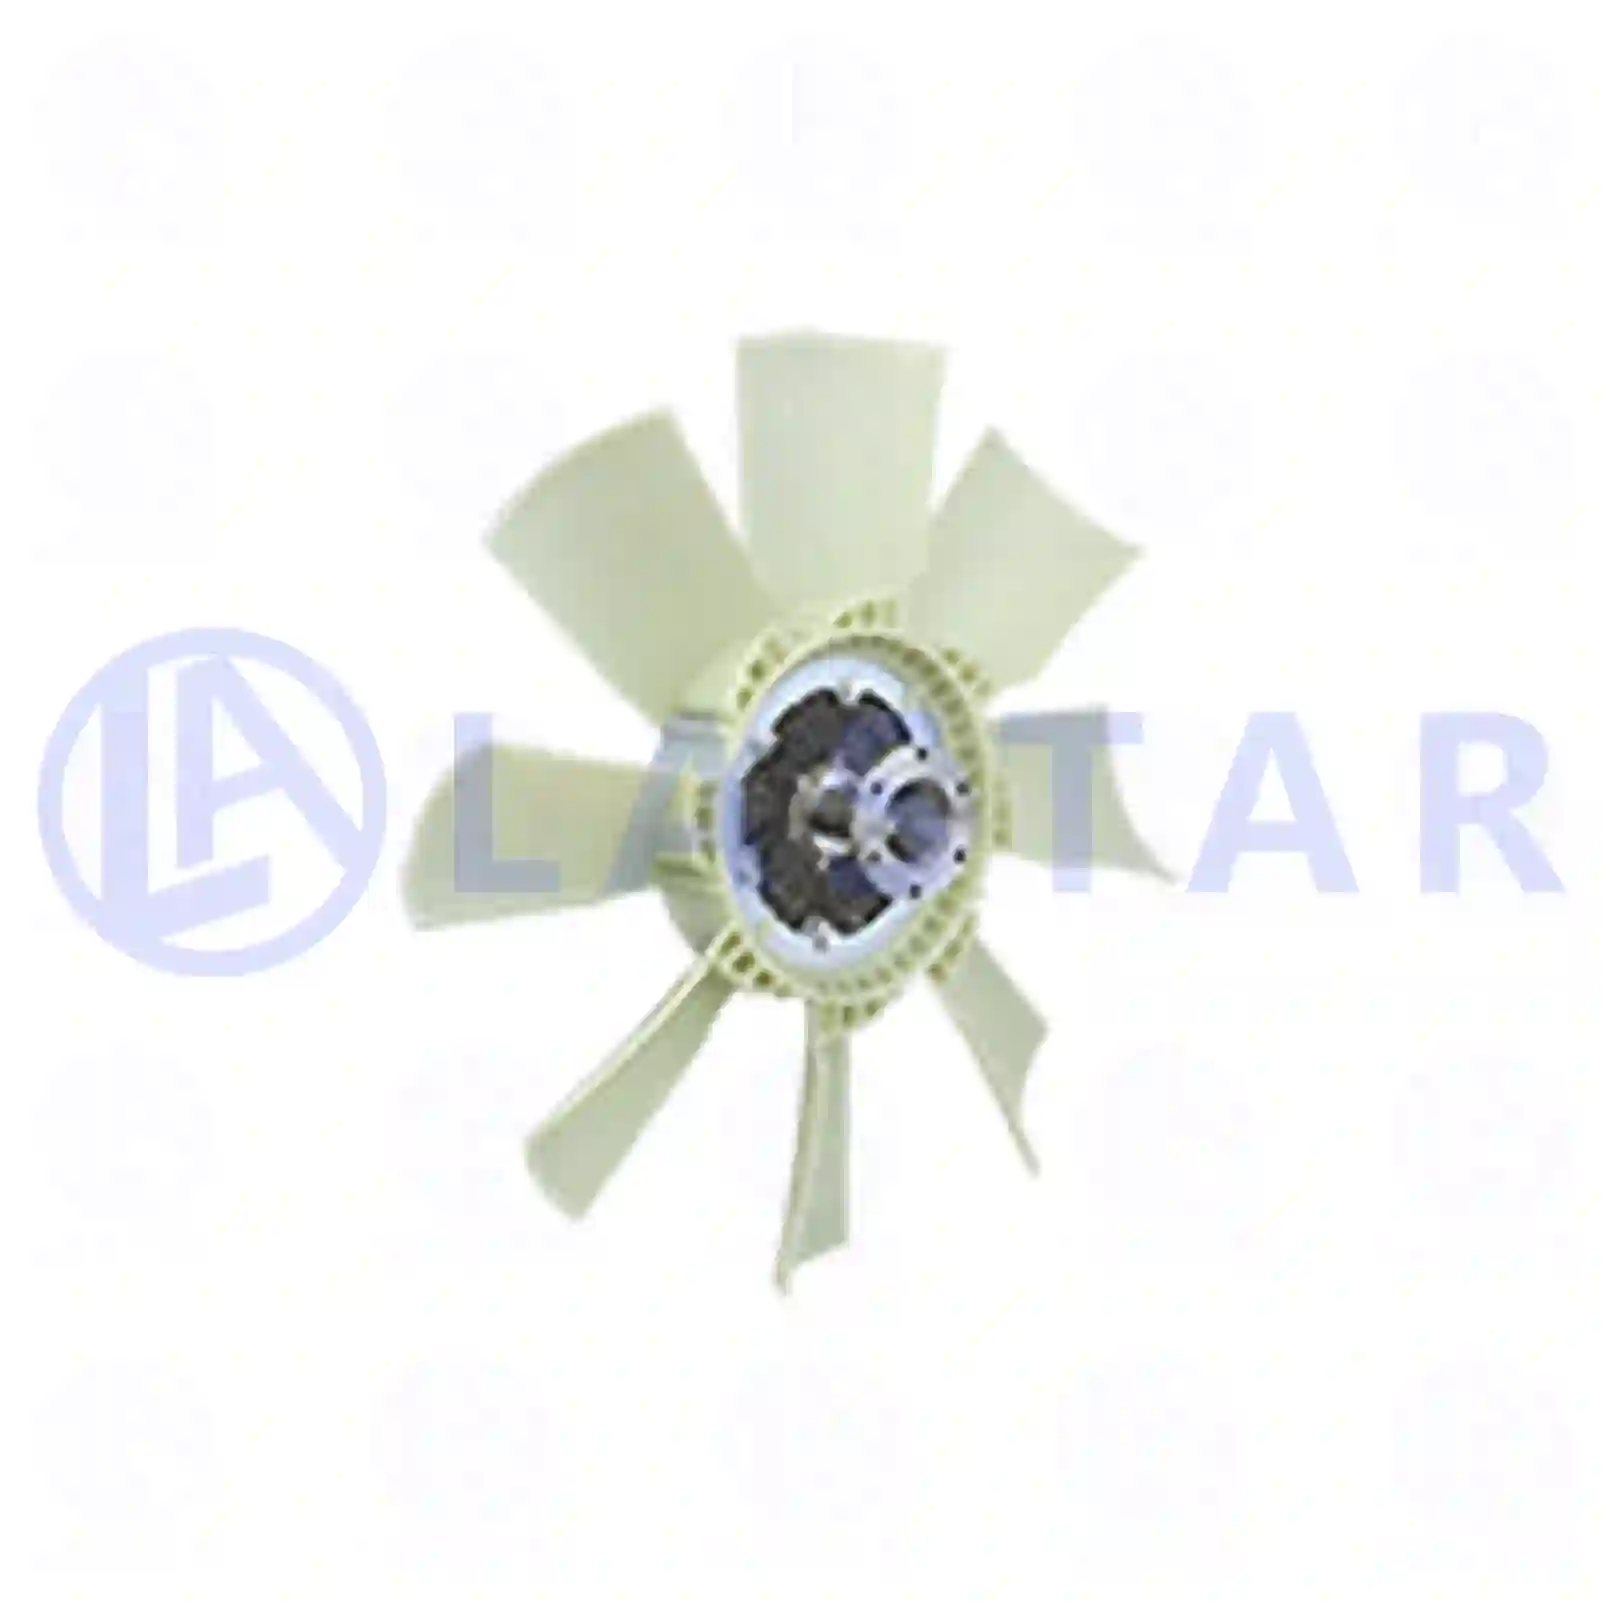 Fan with clutch, 77709732, 10571082, 1392261, 1393424, 1571082, 571082 ||  77709732 Lastar Spare Part | Truck Spare Parts, Auotomotive Spare Parts Fan with clutch, 77709732, 10571082, 1392261, 1393424, 1571082, 571082 ||  77709732 Lastar Spare Part | Truck Spare Parts, Auotomotive Spare Parts